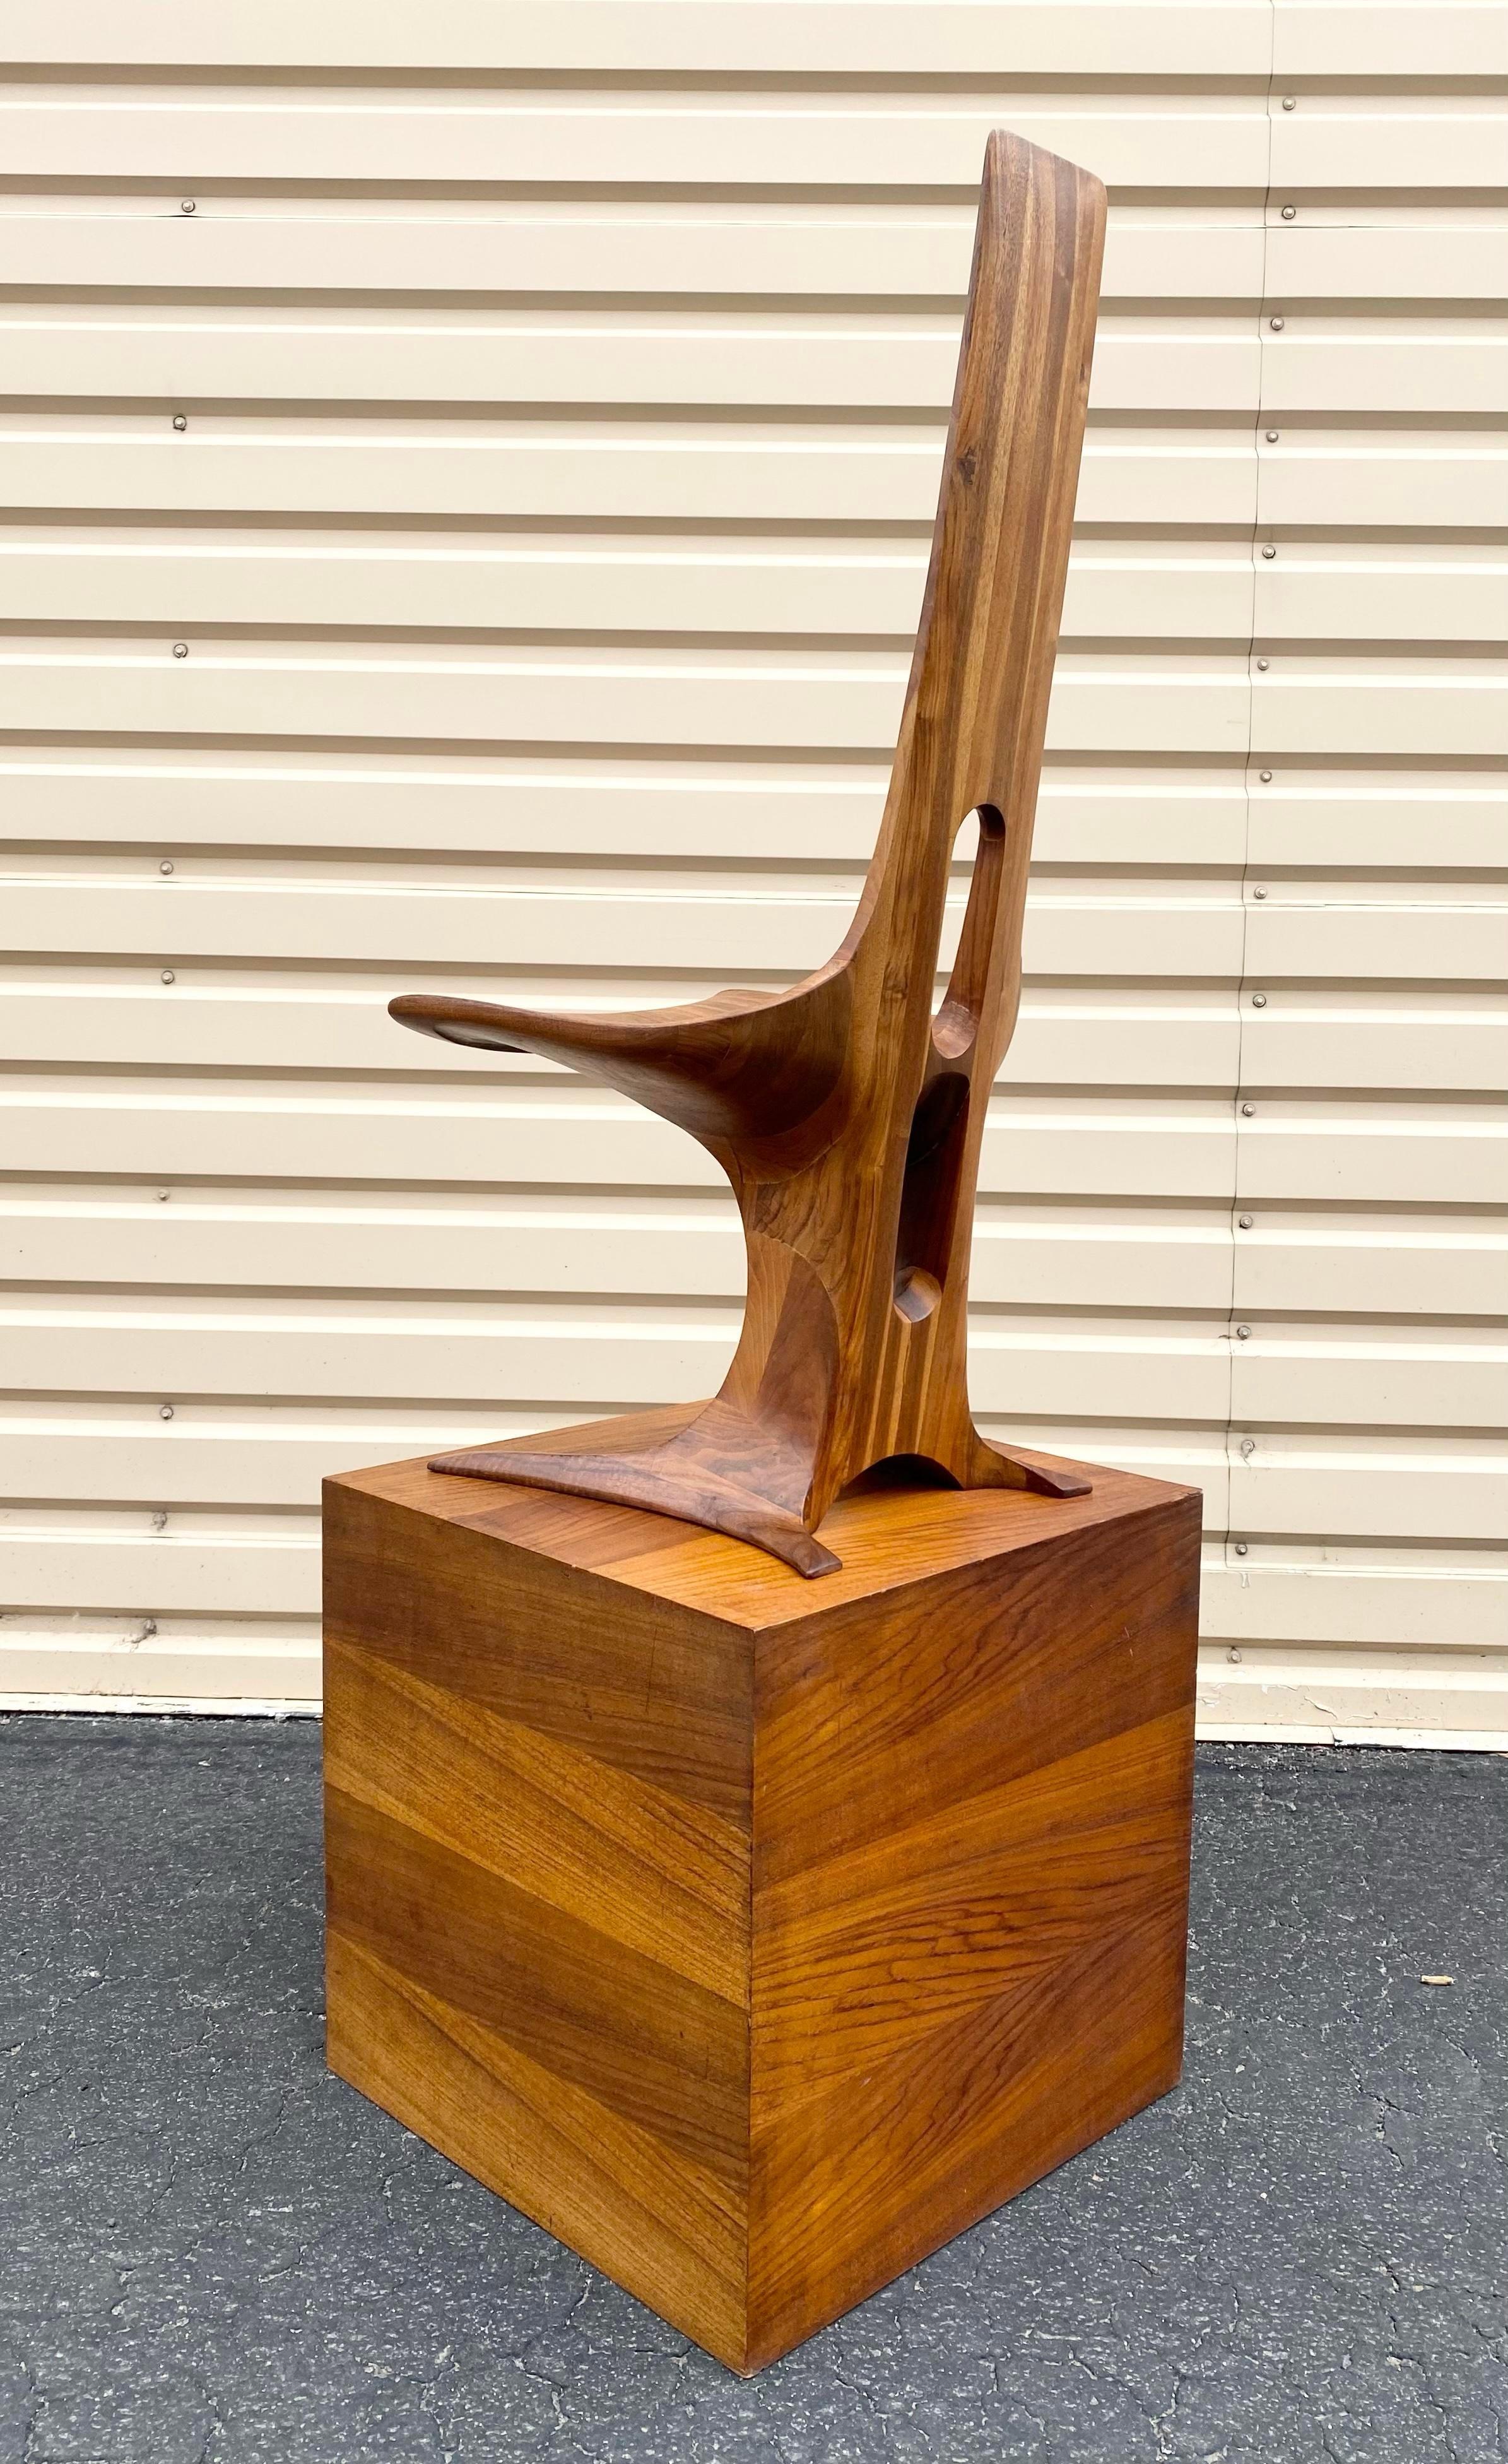 Modernist Sculptural Walnut Chair by Edward G. Livingston for Archotypo (1970) For Sale 3